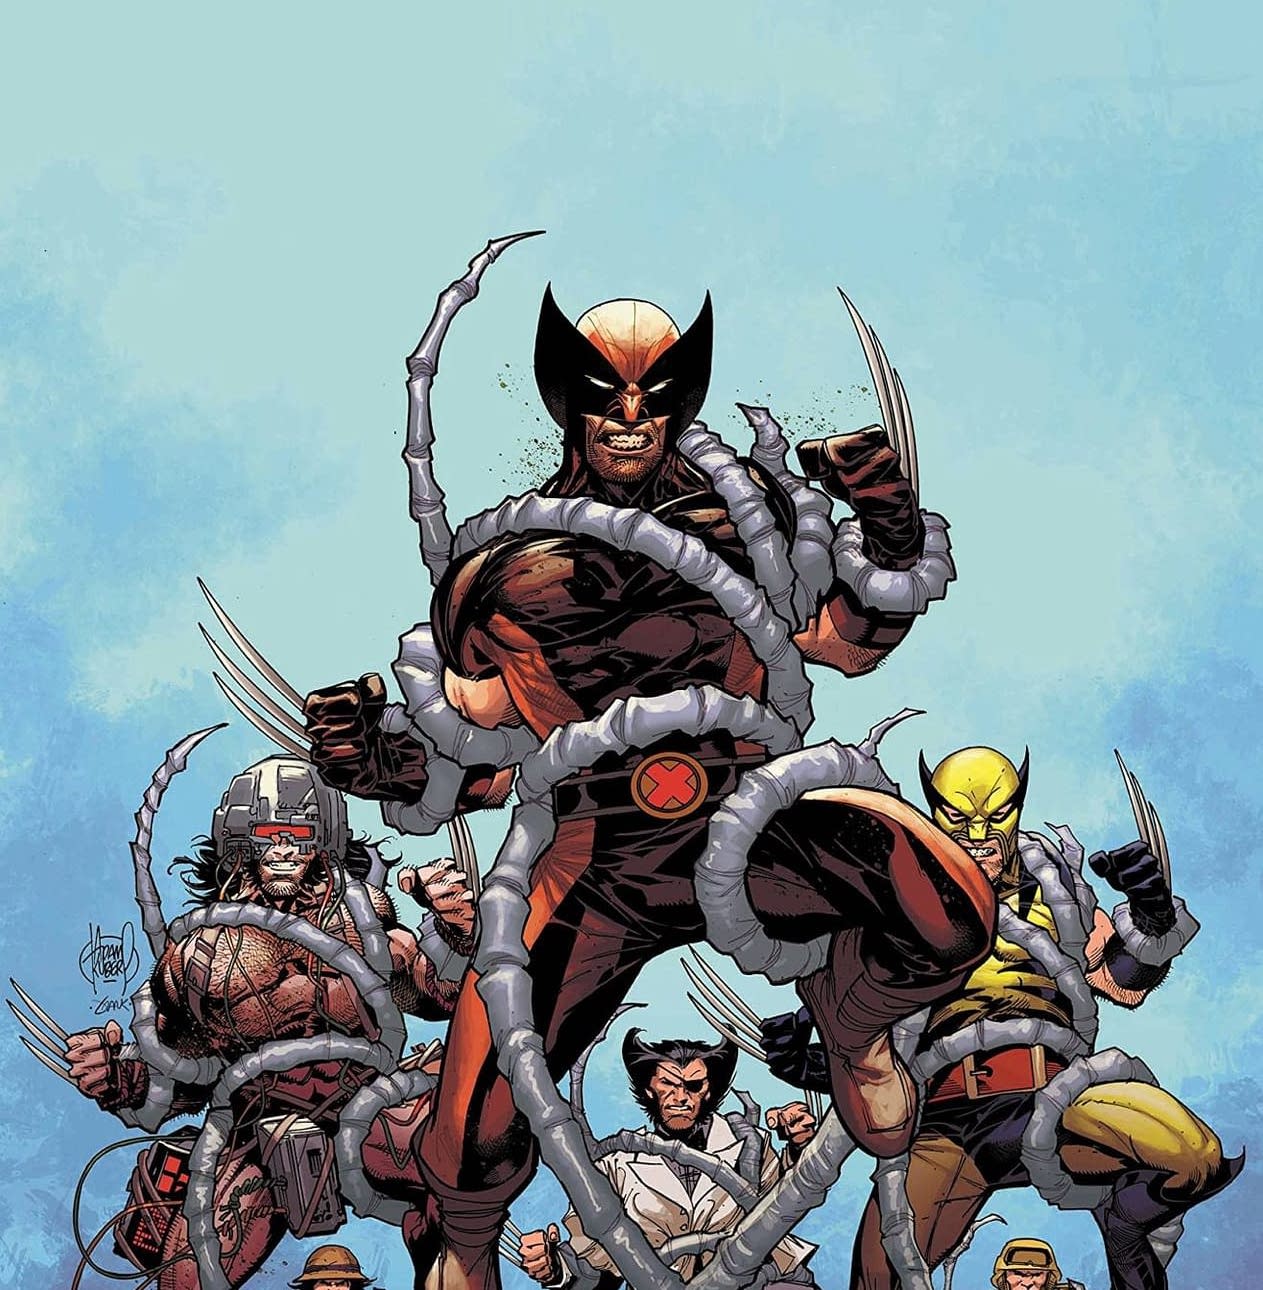 'X Lives & Deaths of Wolverine' is one of the best events of 2022